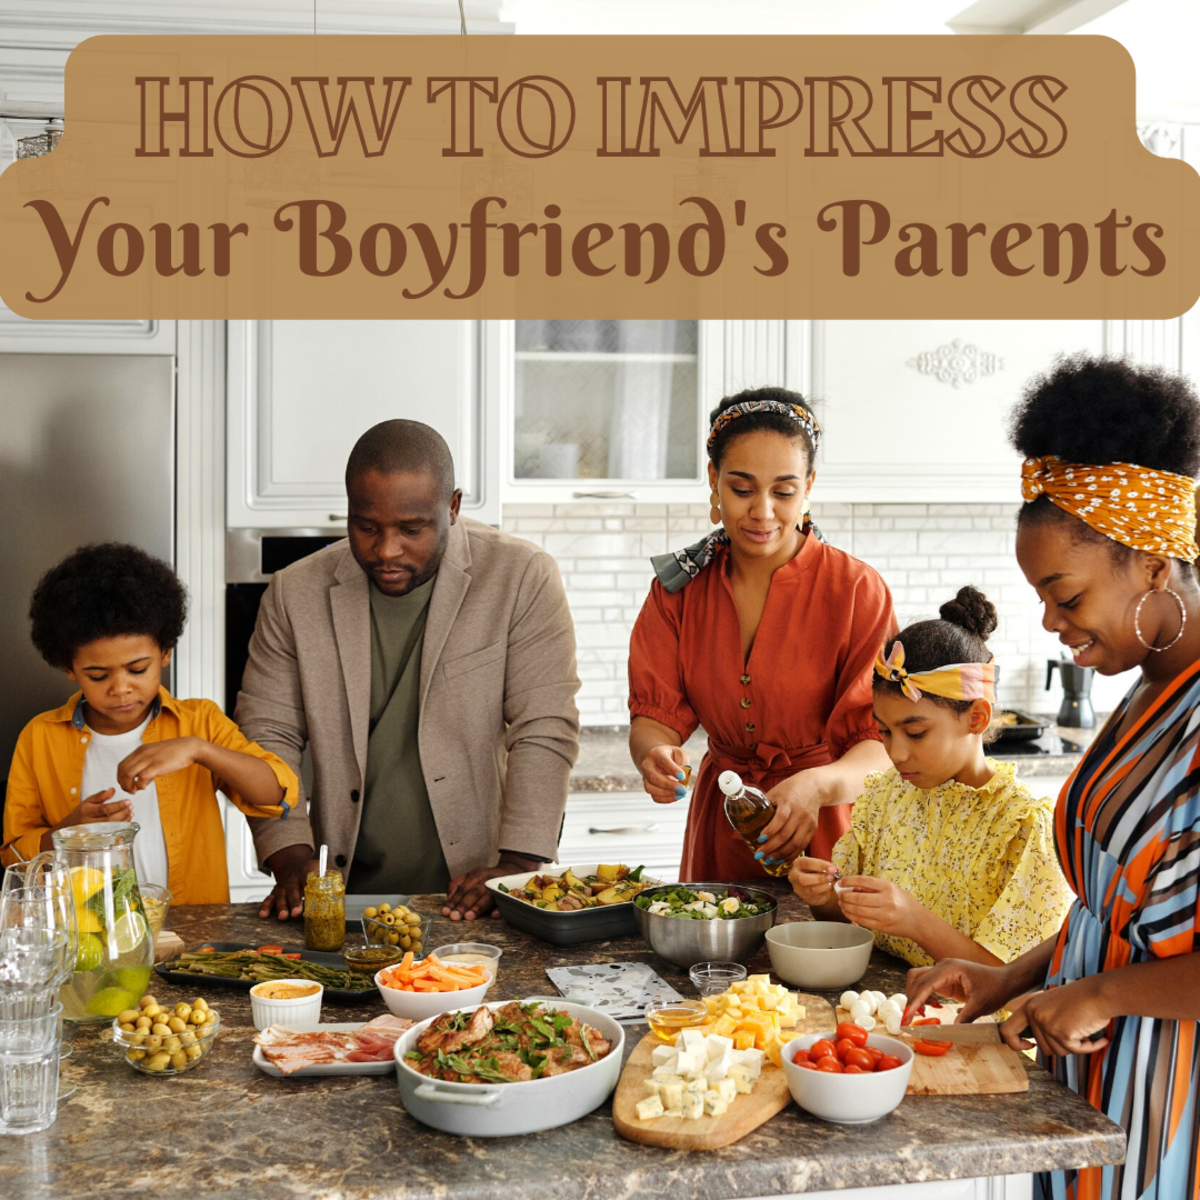 Scared of meeting your boyfriend's family for the first time? Make the whole situation easier to handle with these tips.